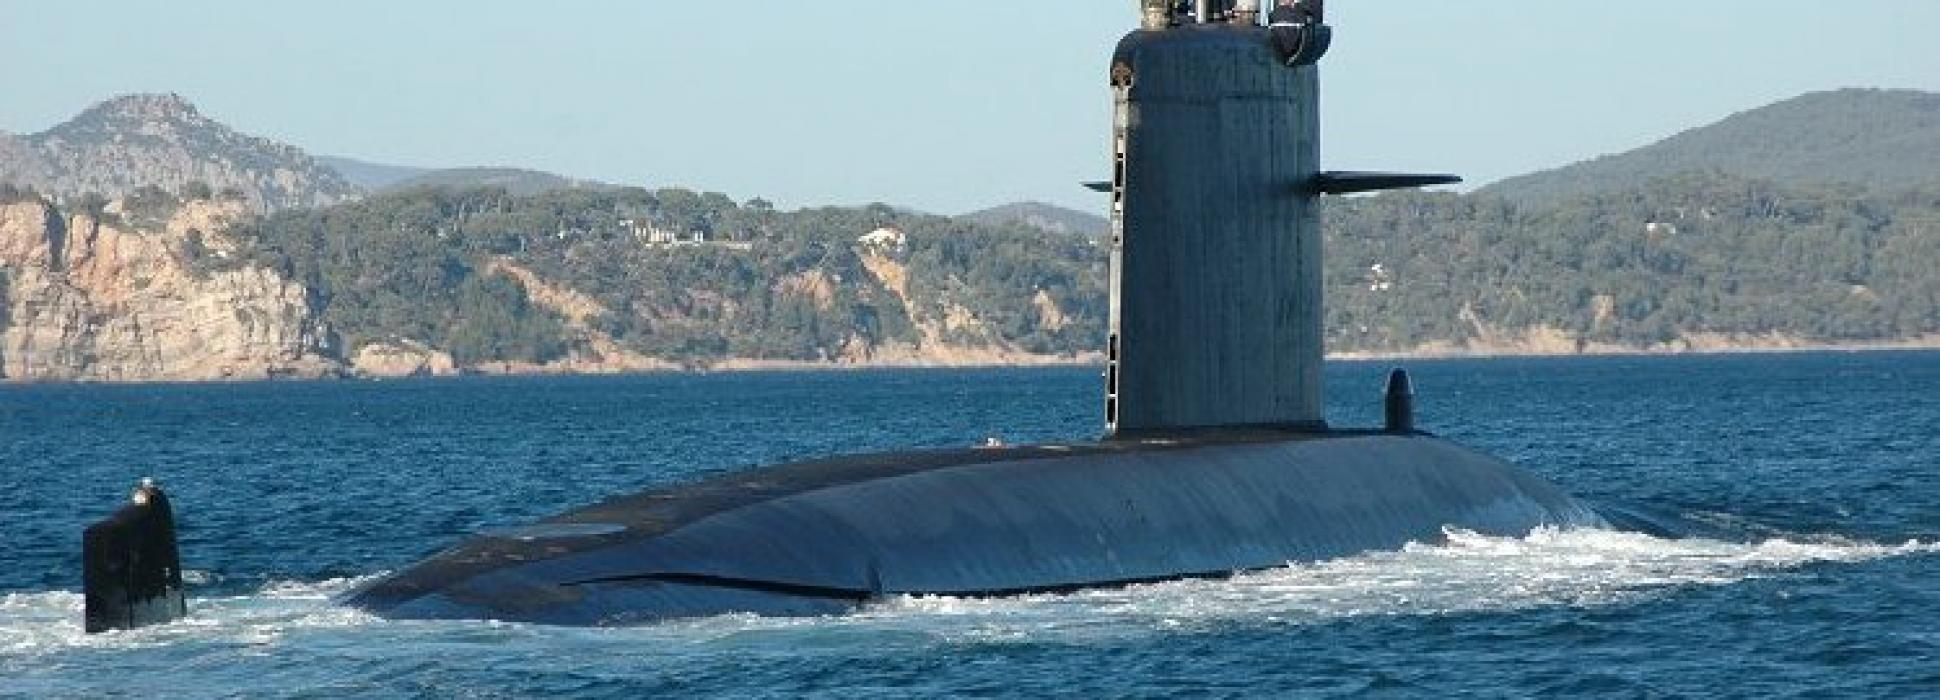 Le Saphir, French nuclear submarine, will be dismantled in Cherbourg